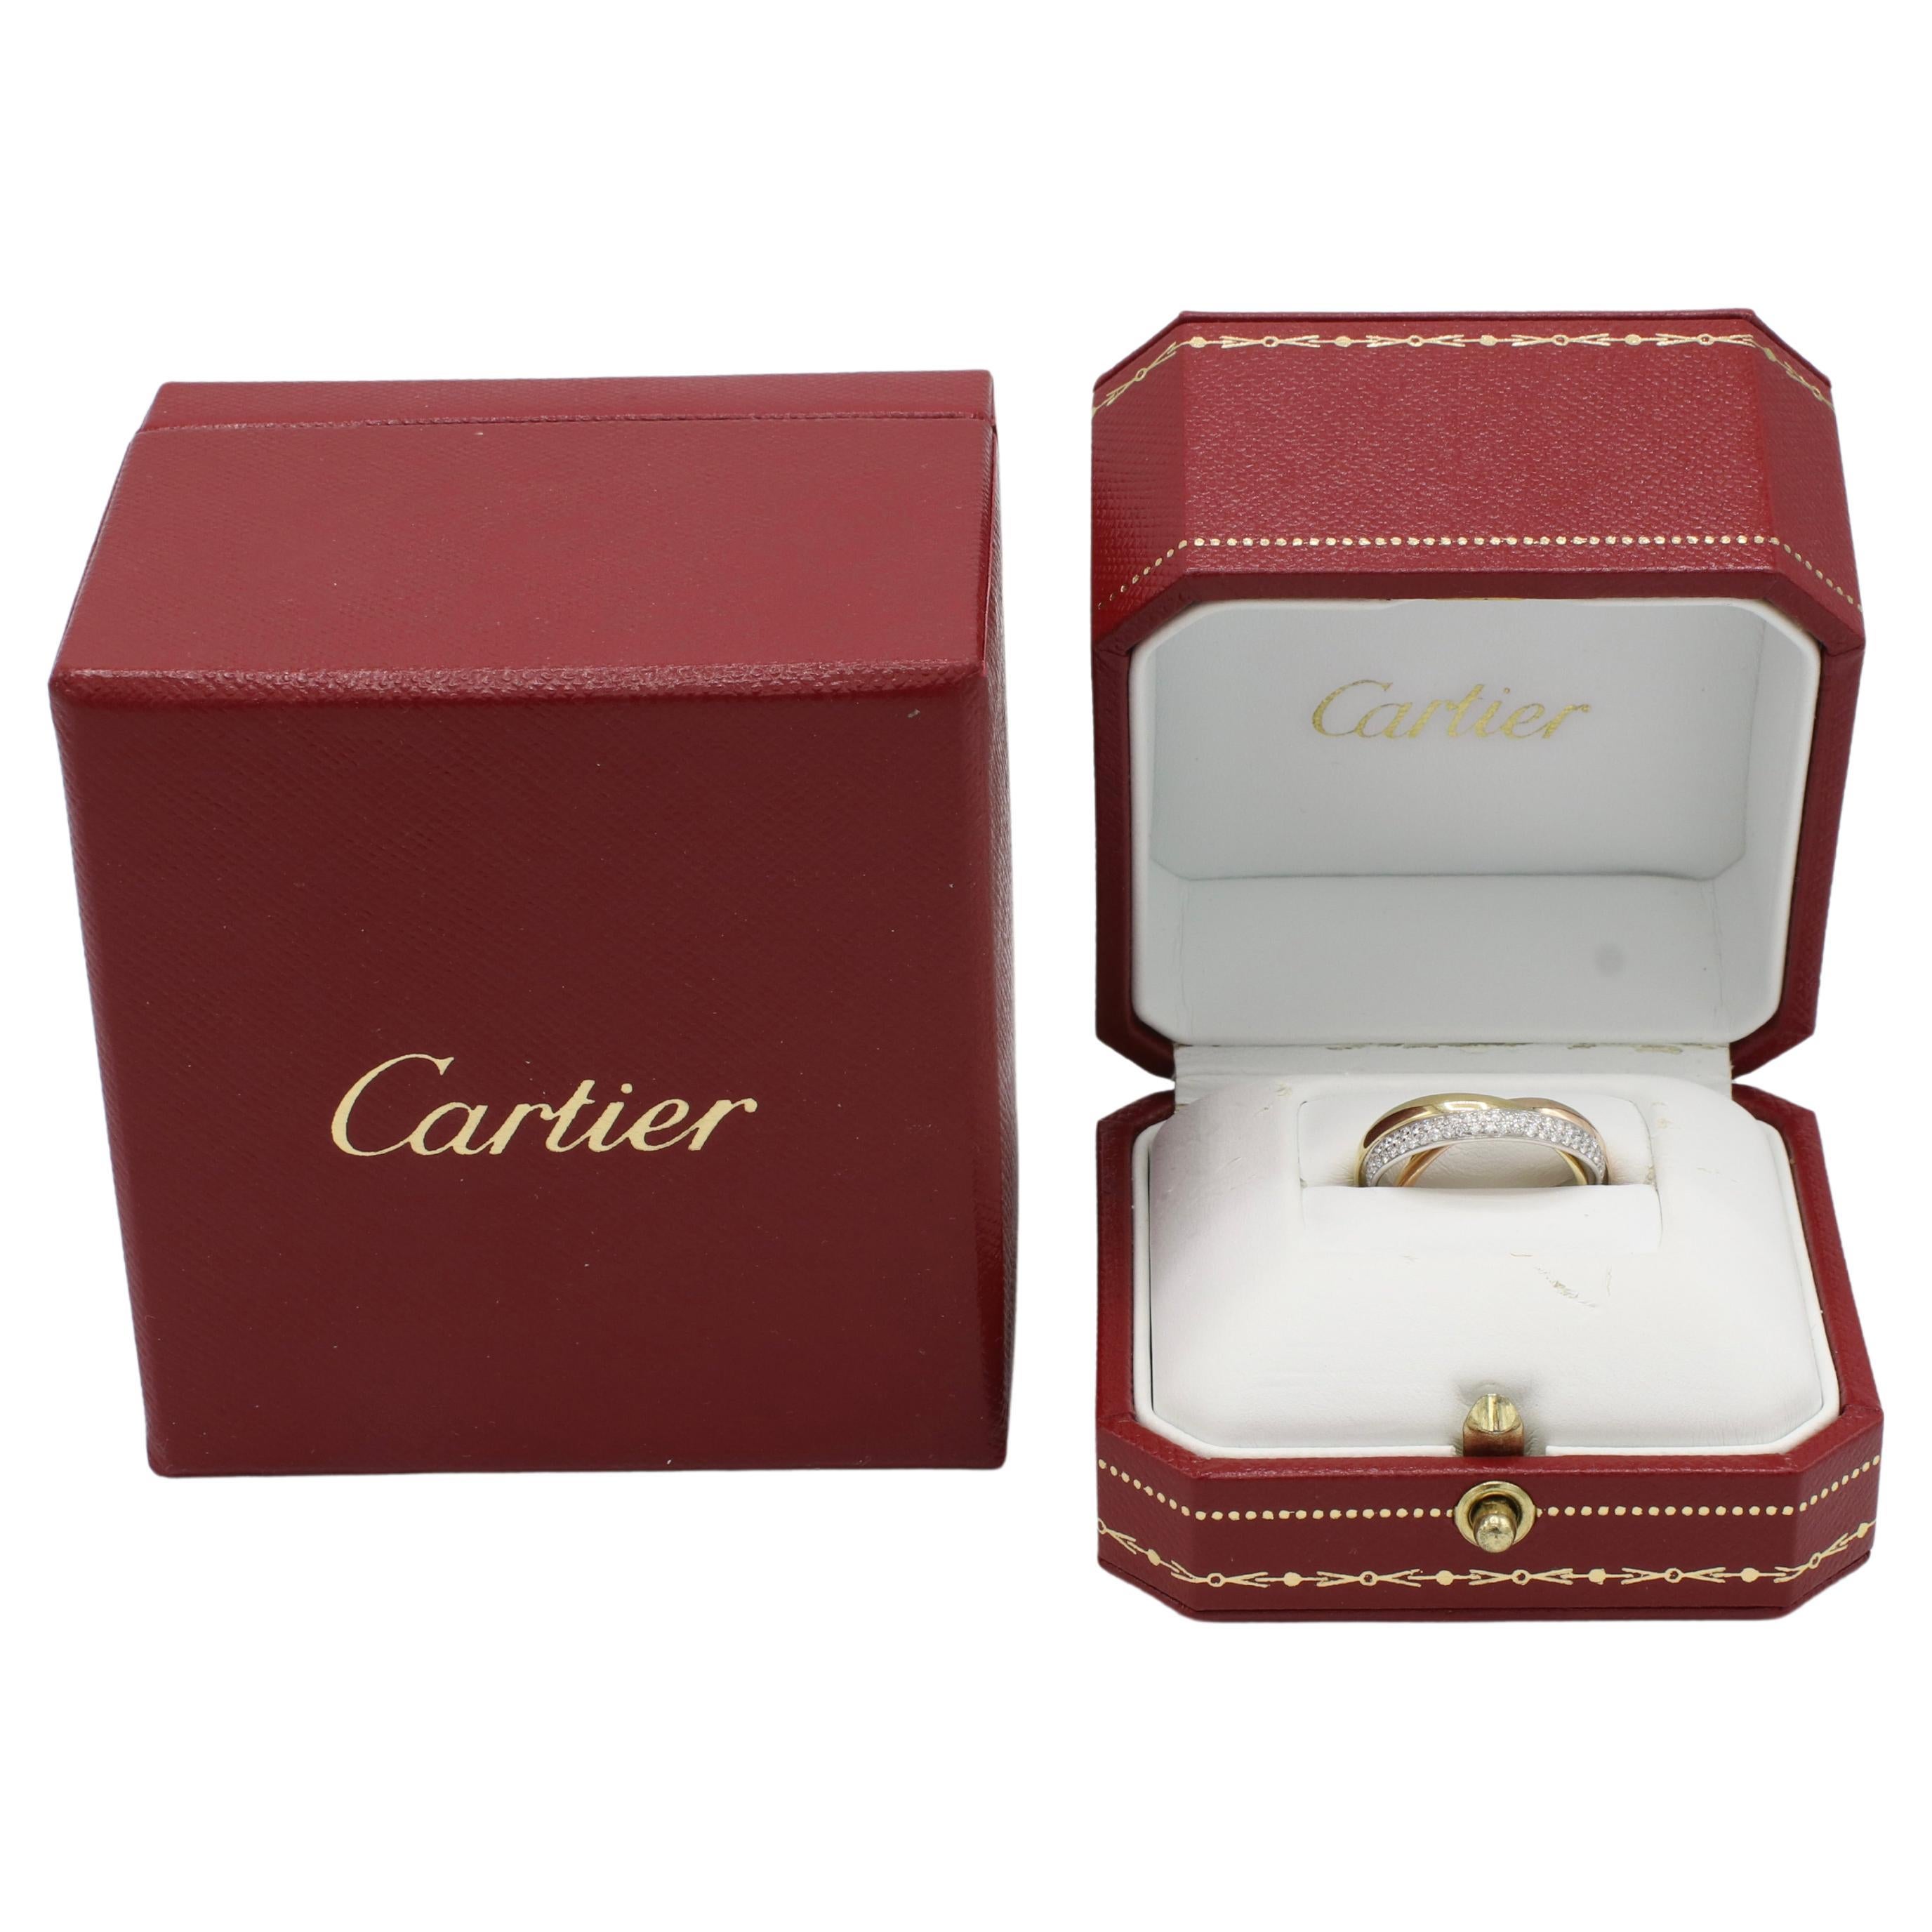 Cartier Trinity Rolling Tri-Color Pave Natural Diamond 18 Karat Gold Band Ring 
Metal: 18k yellow, rose, white gold
Weight: 4.96 grams
Diamonds: Approx. 0.46 CTW round natural diamonds F-G VVS 
Band width: 2.5mm each
Size: 54 (6.75 US)
Retail: